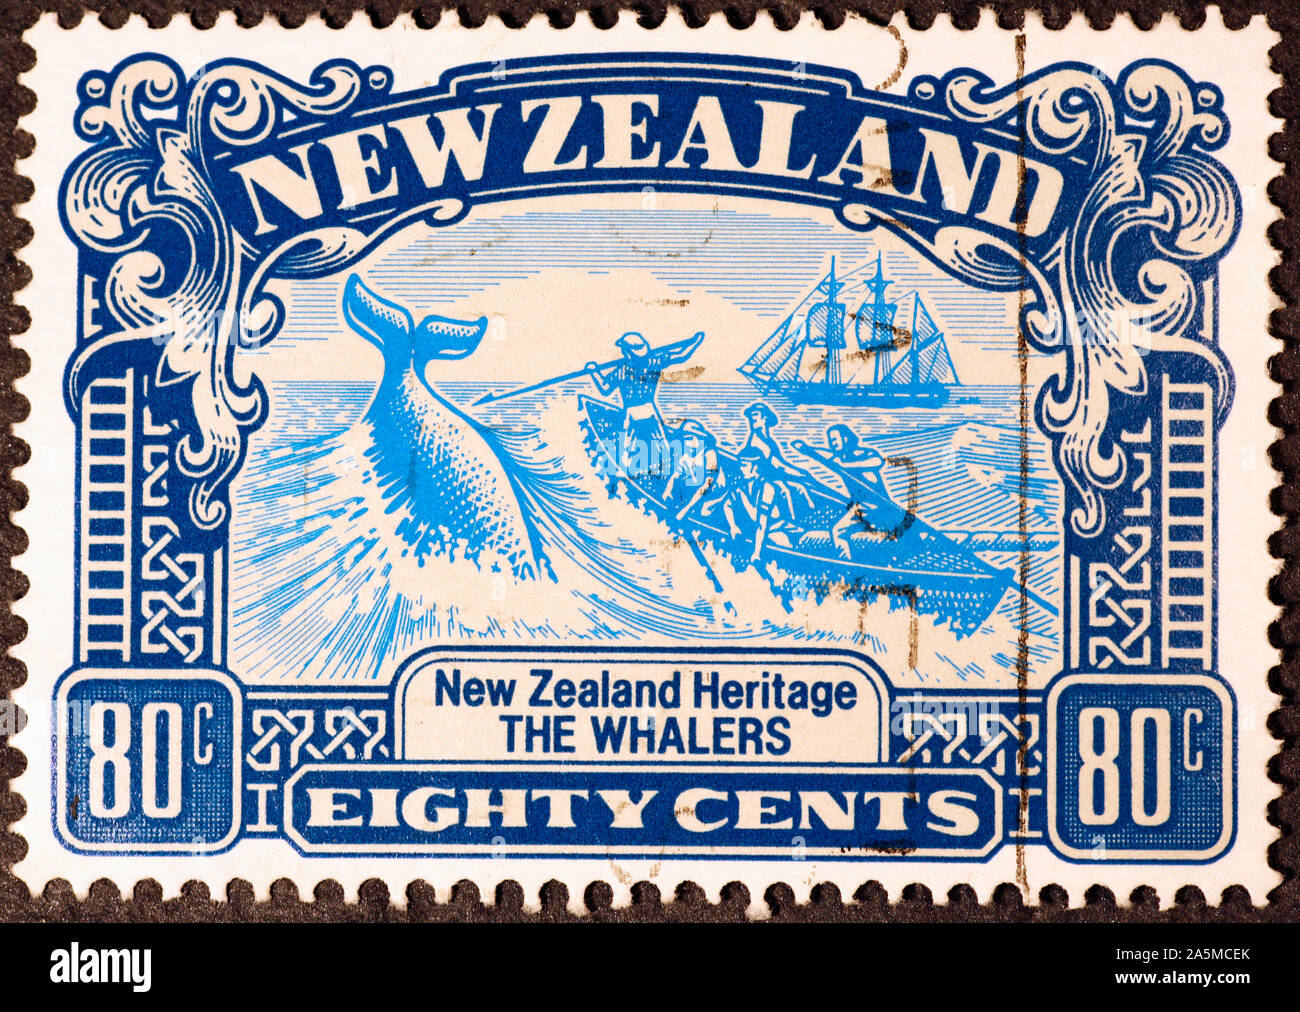 Old whalers on vintage New Zealand postage stamp Stock Photo